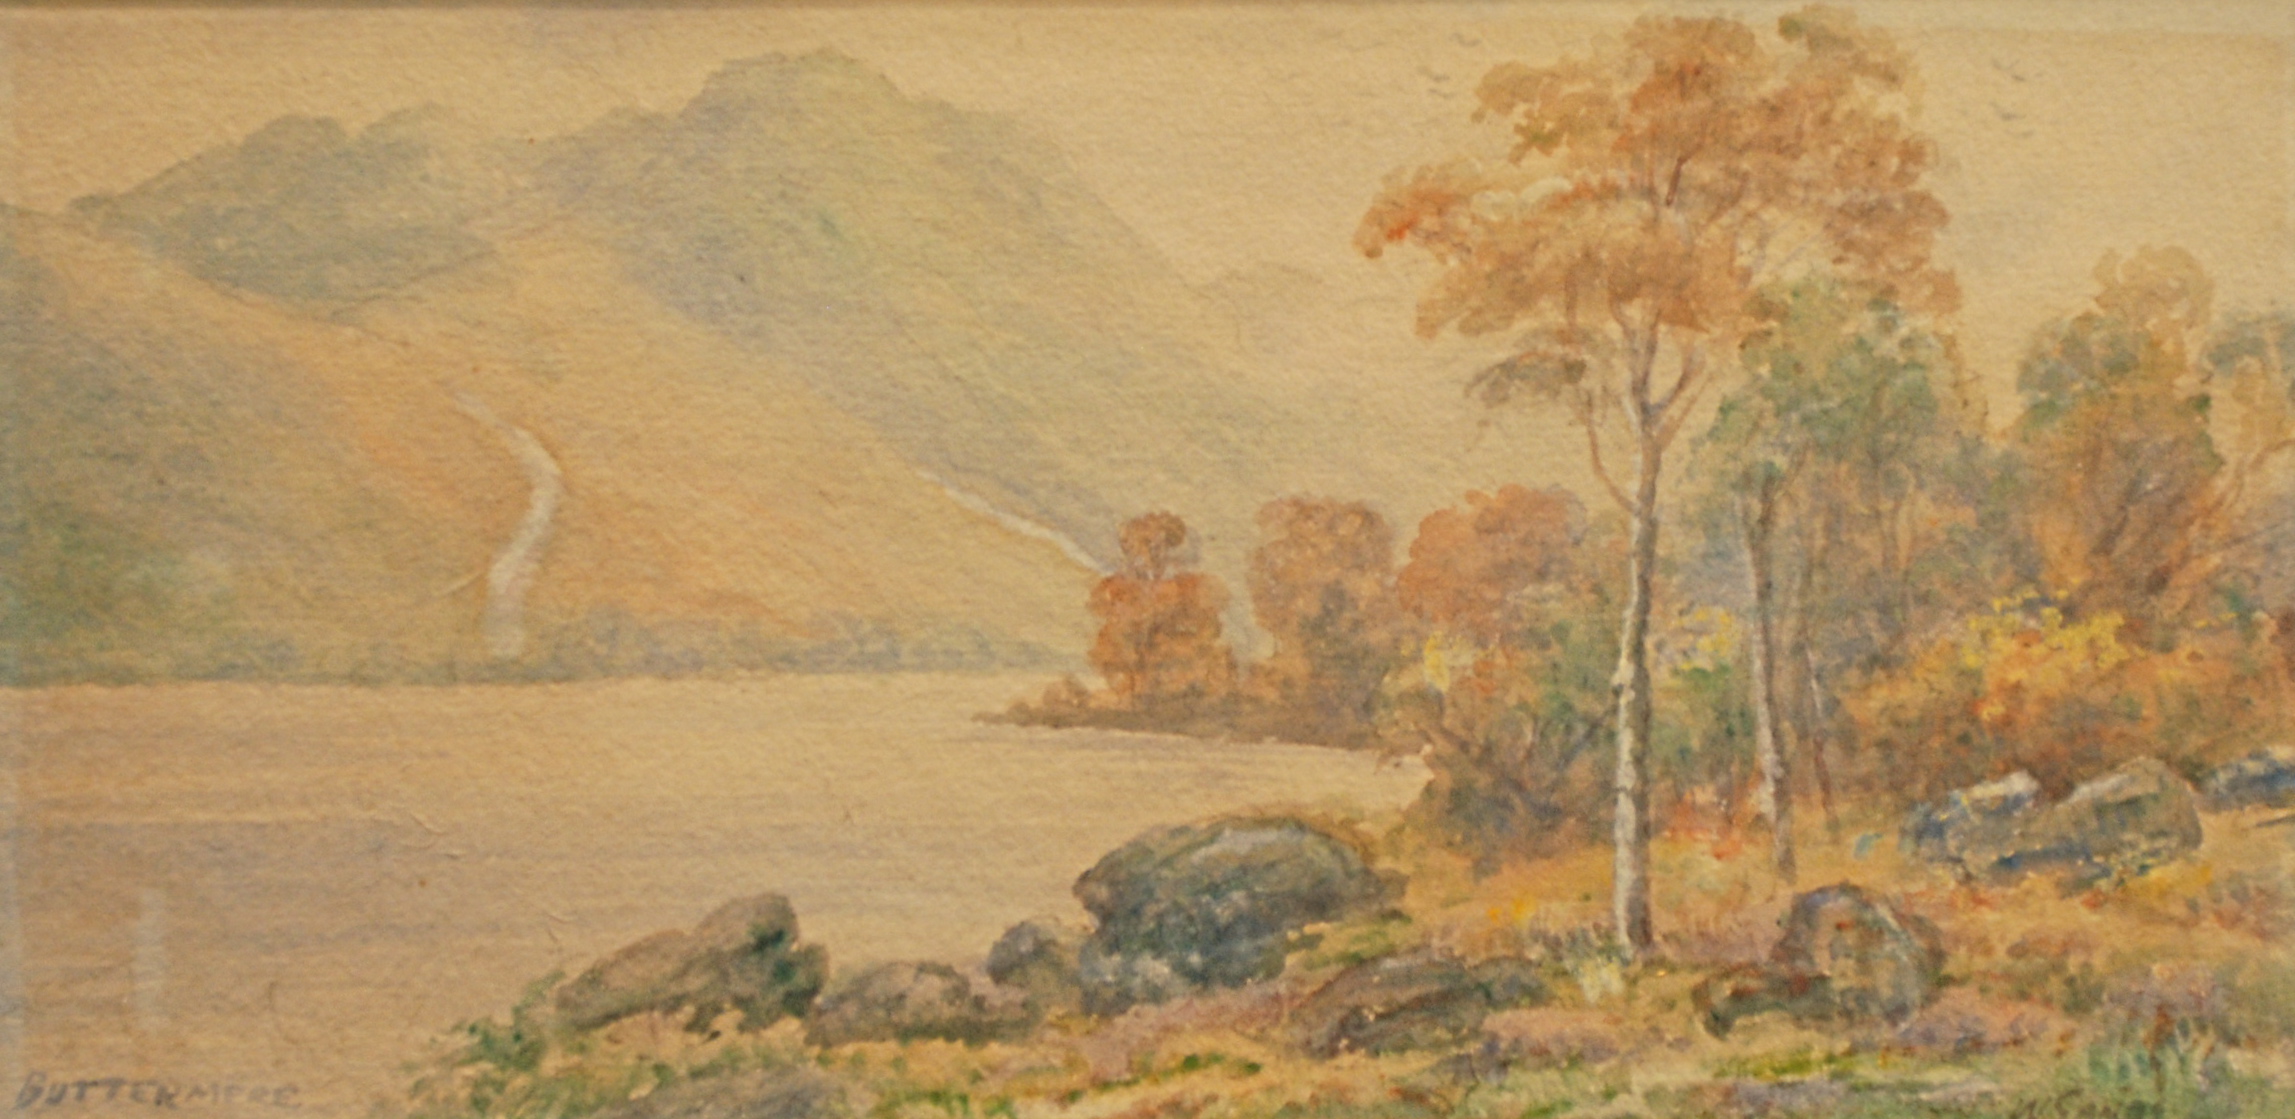 W. SANDS
Buttermere
Watercolour
Signed and inscribed
12 x 25cm